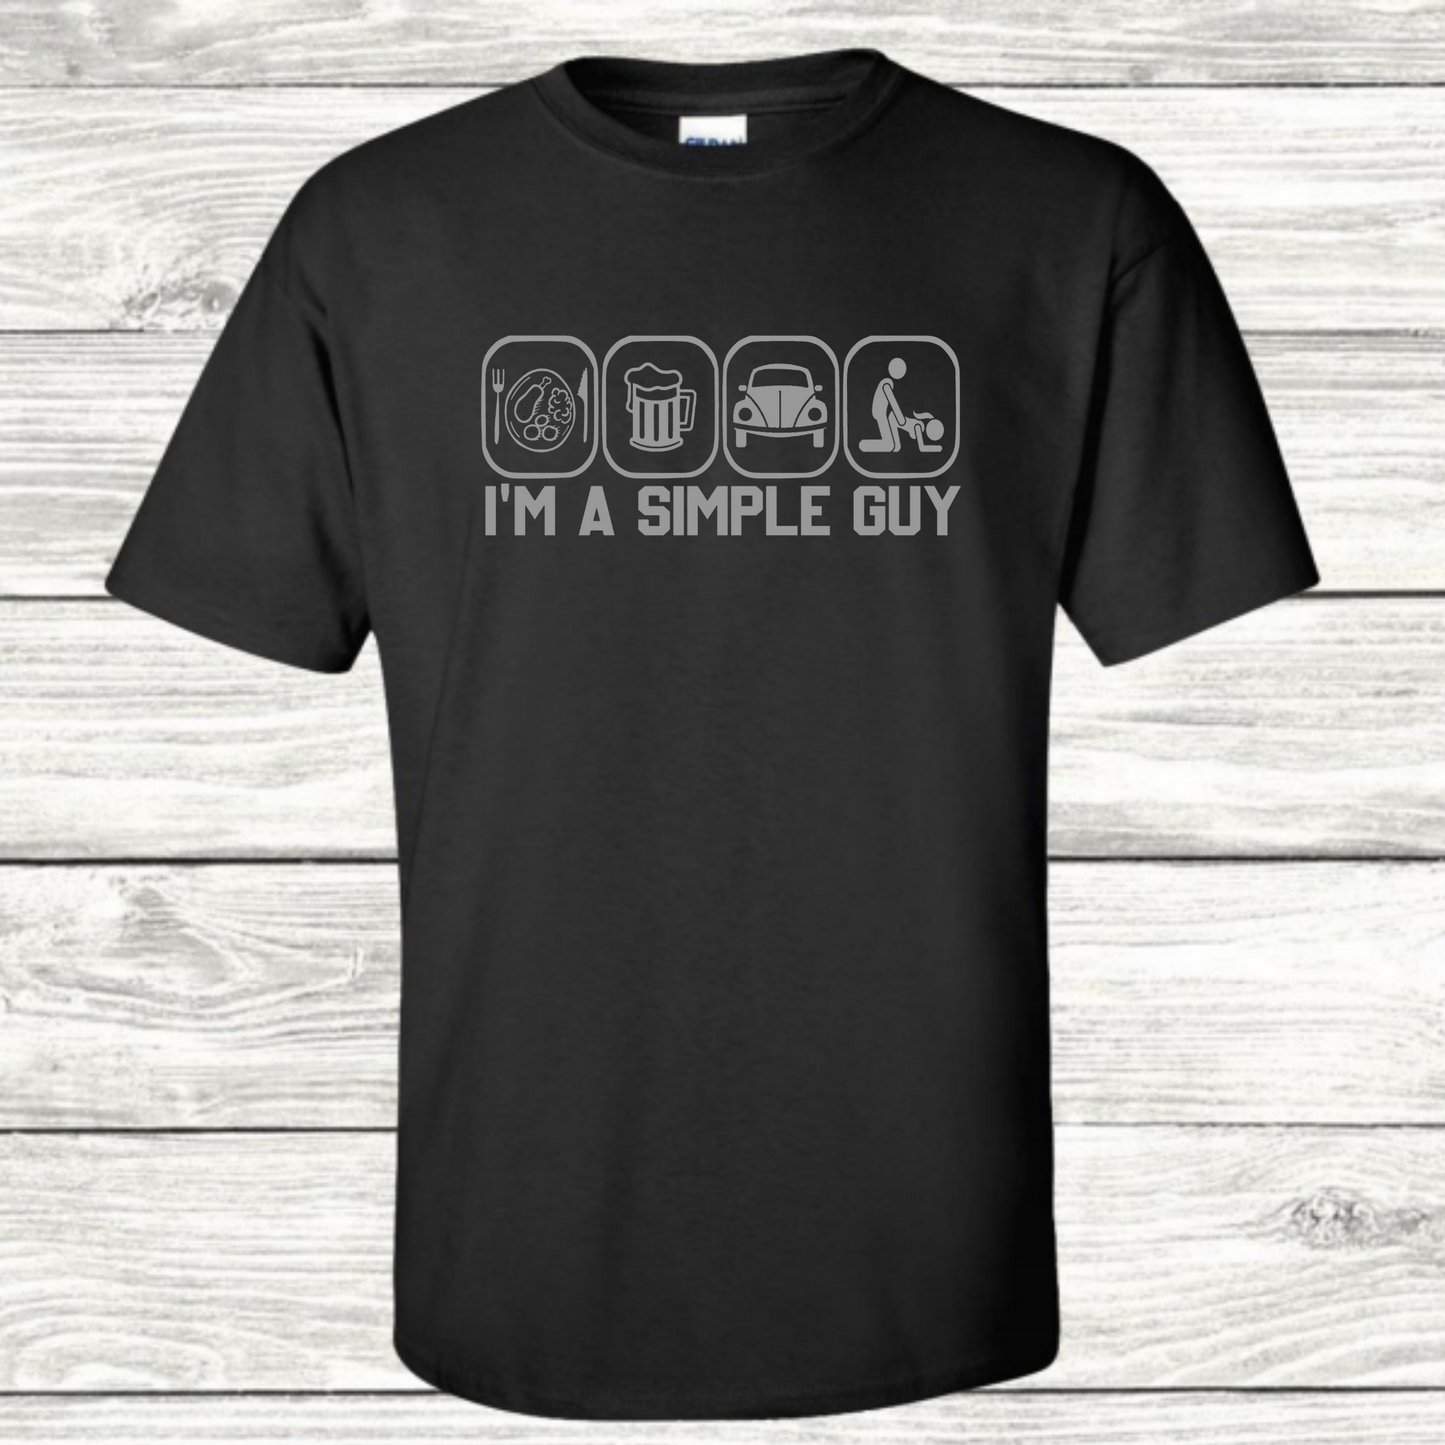 I'm A Simple Guy - Food, Beer, Classic Bug, and Booty - Graphic T-Shirt - Mister Snarky's